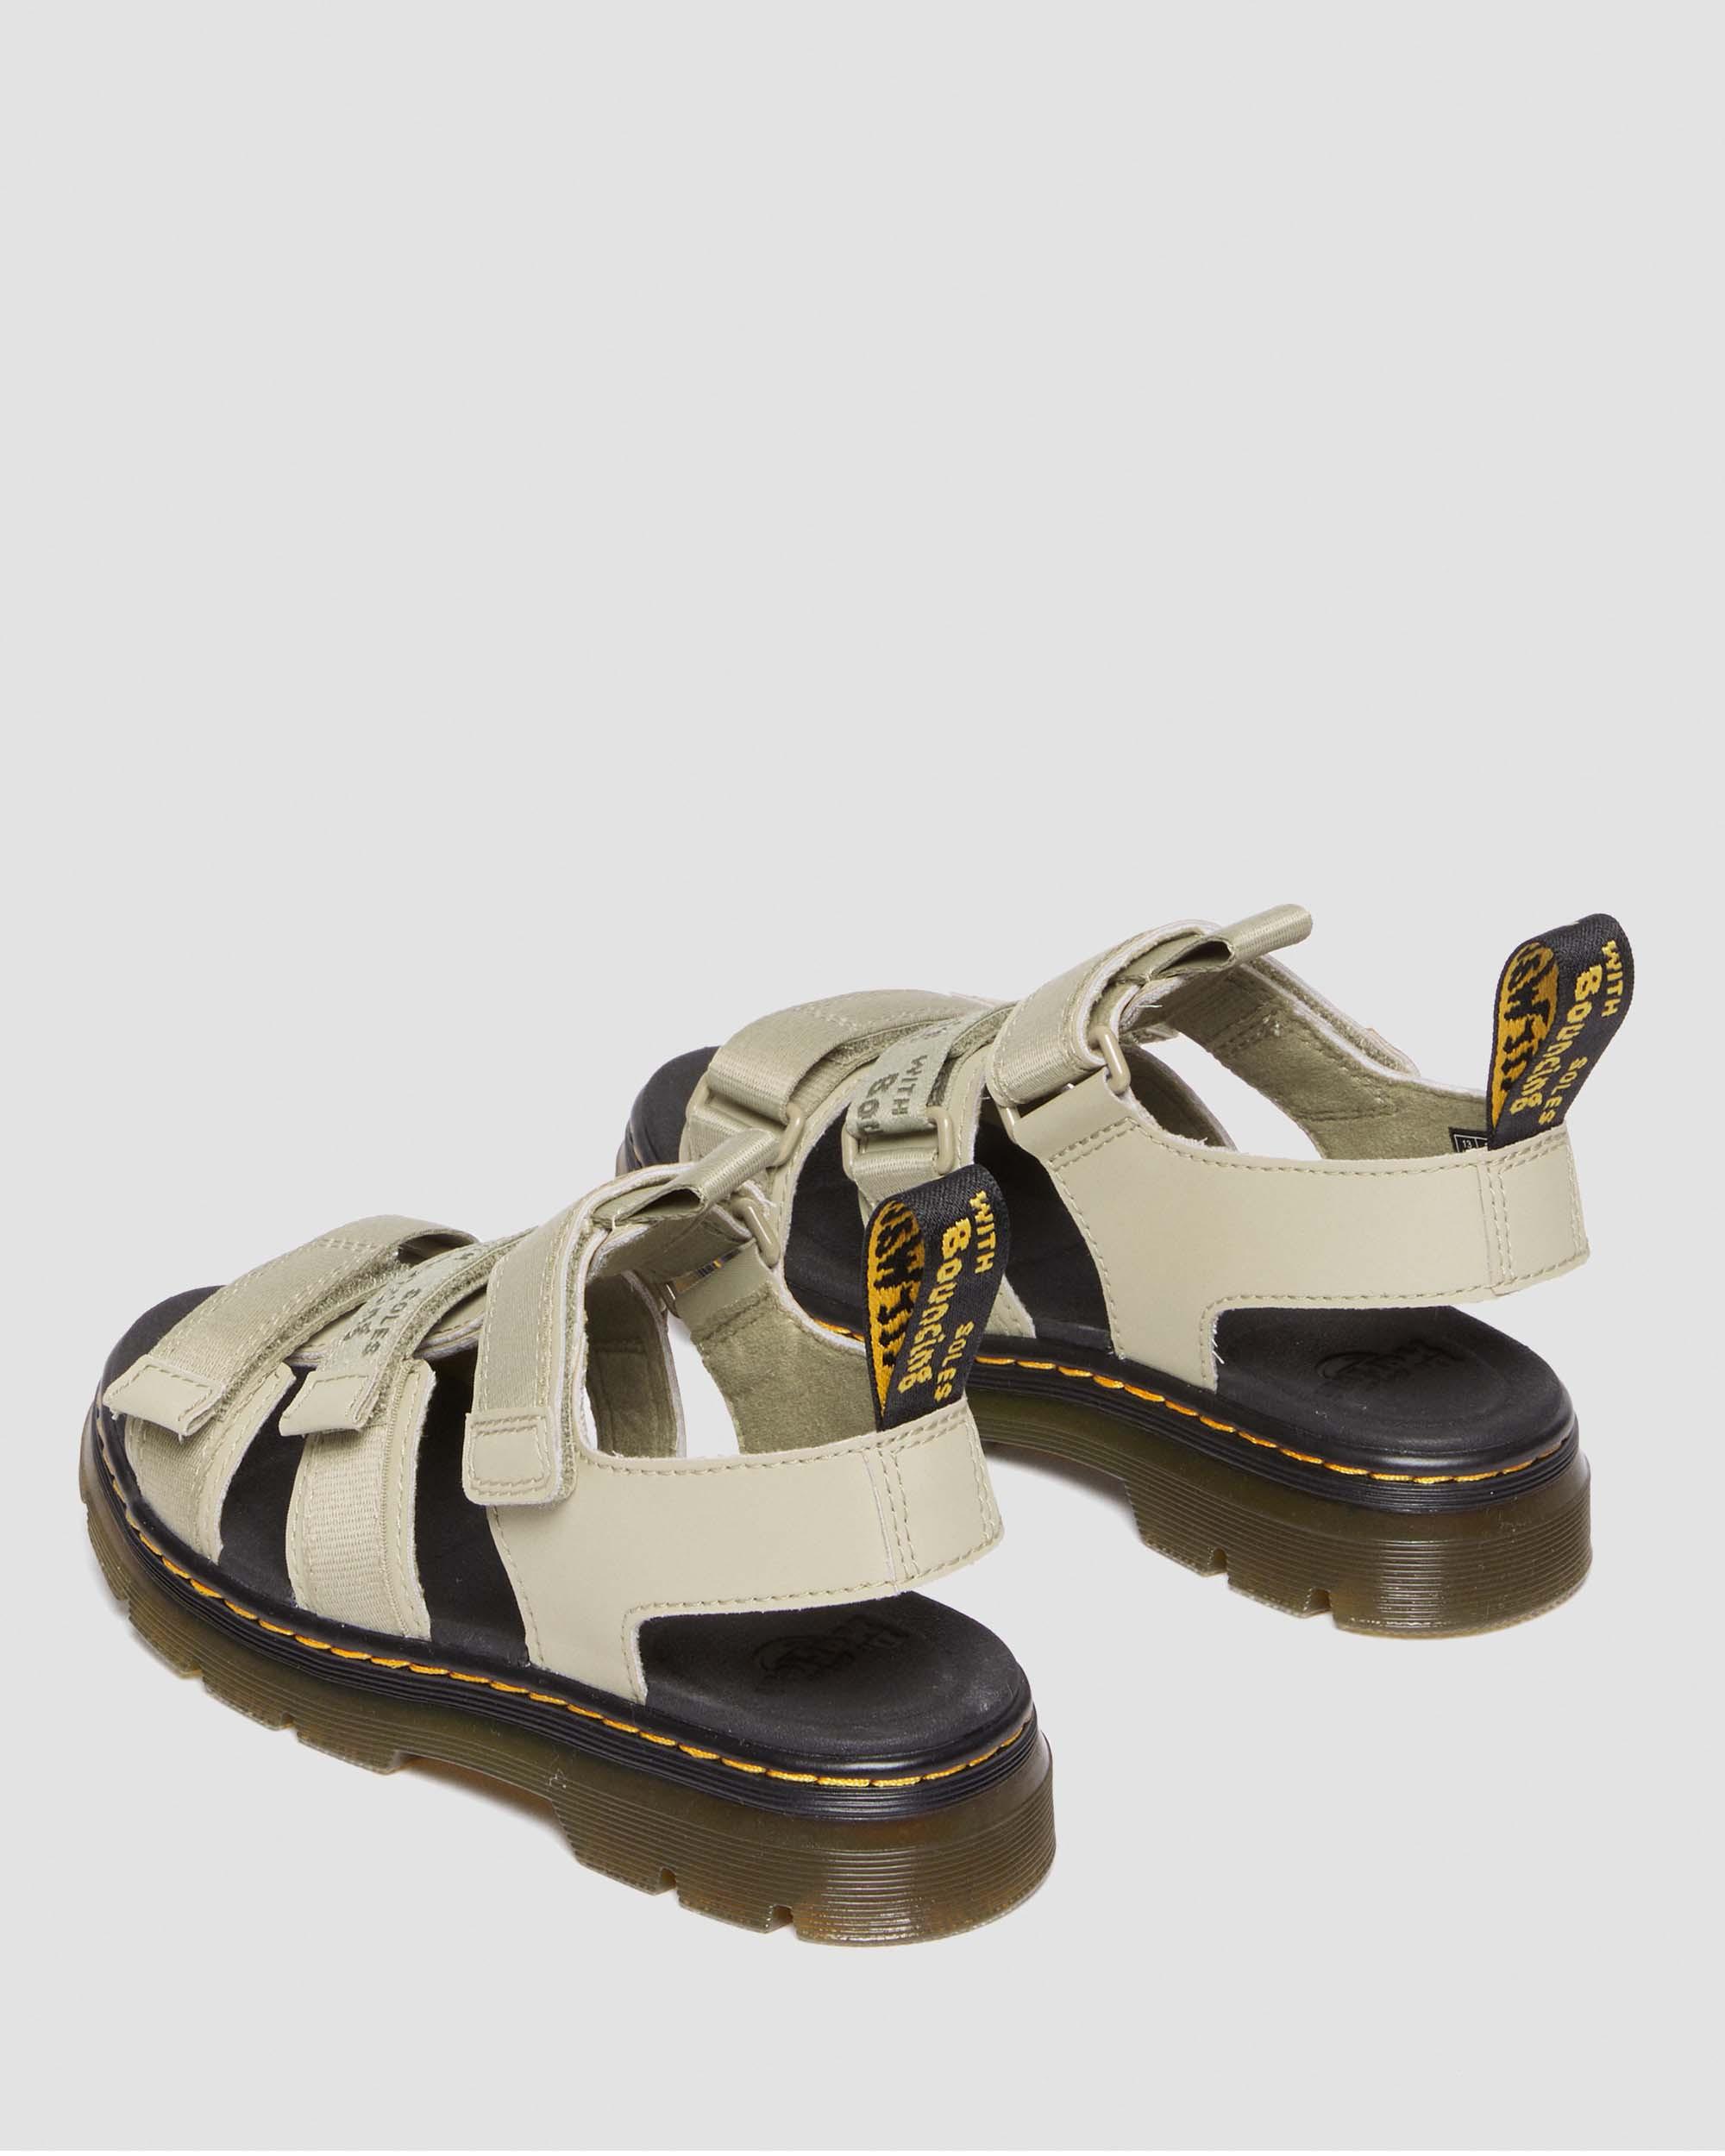 Junior Callan Extra Tough Leather Sandals in Pale Olive | Dr. Martens